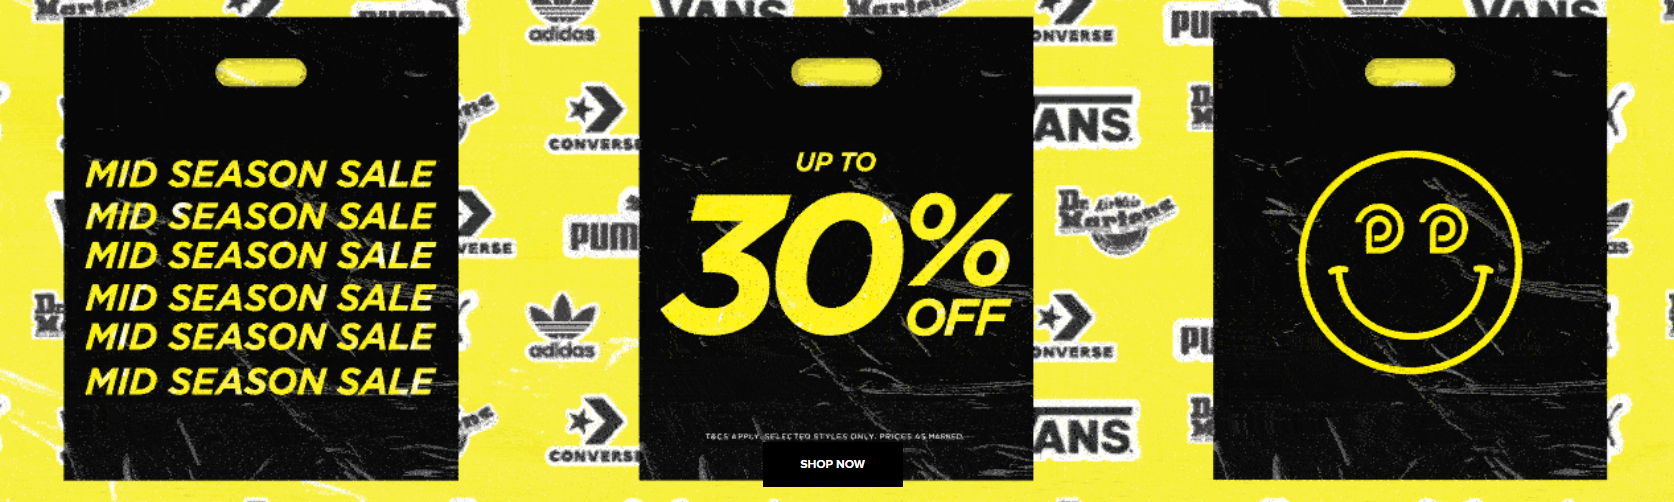 Up to 30% OFF from Adidas, Converse, Skechers, & more Mid Season sale at Platyous Shoes.